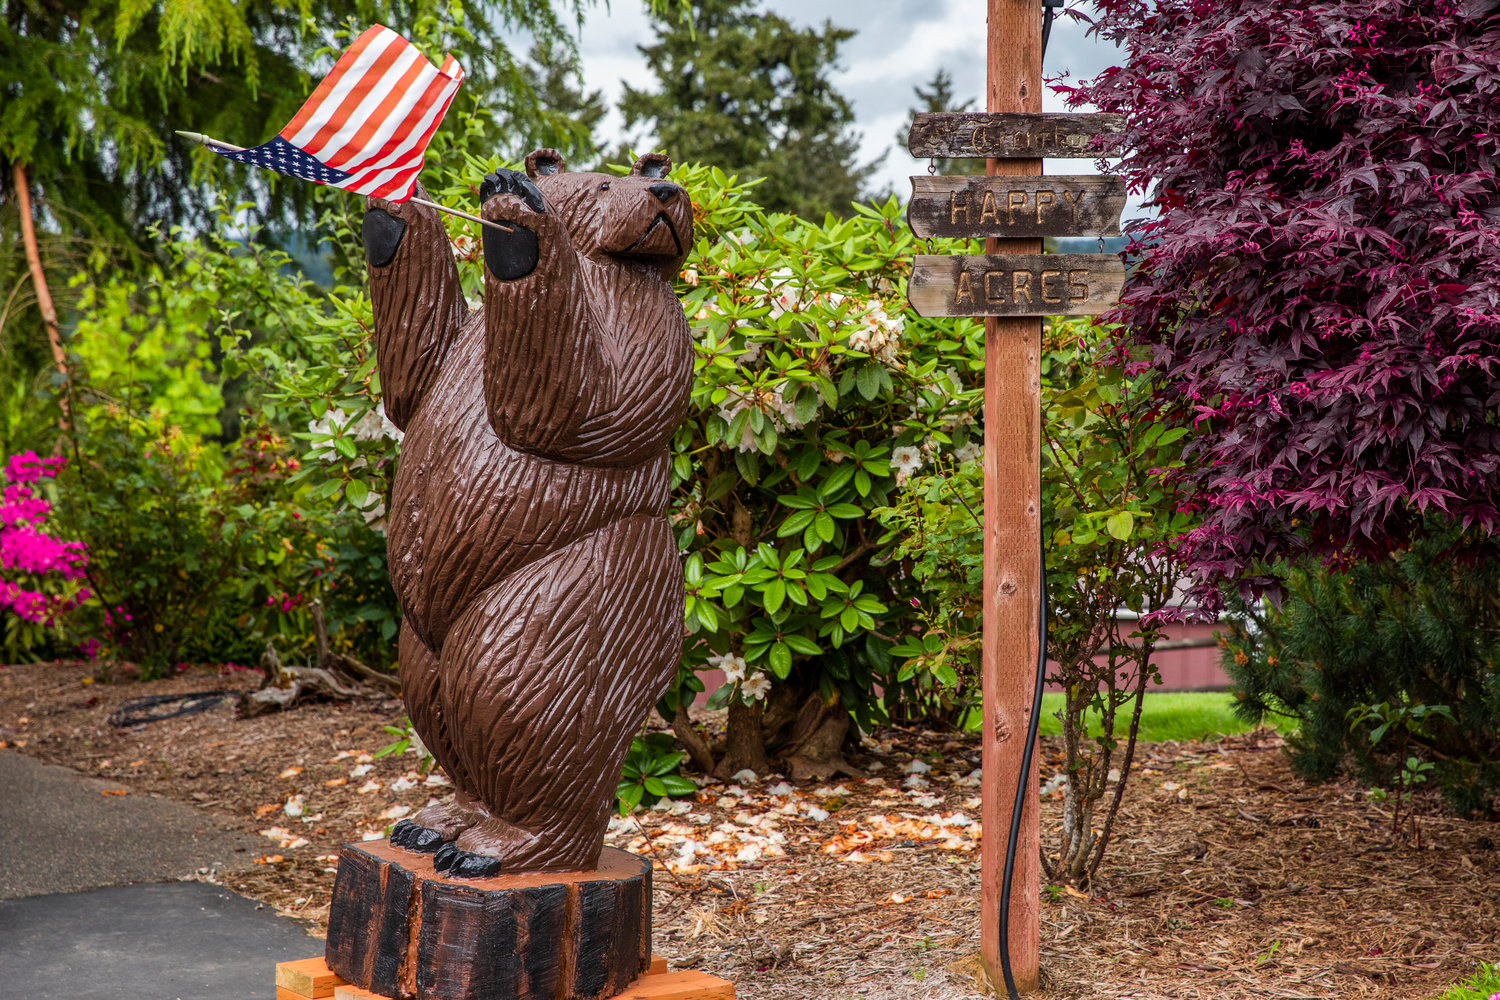 A wooden bear statue is displayed with a flag on the Trentlage property next to a sign that reads, “Happy Acres,” on Davis Hill in Centralia.